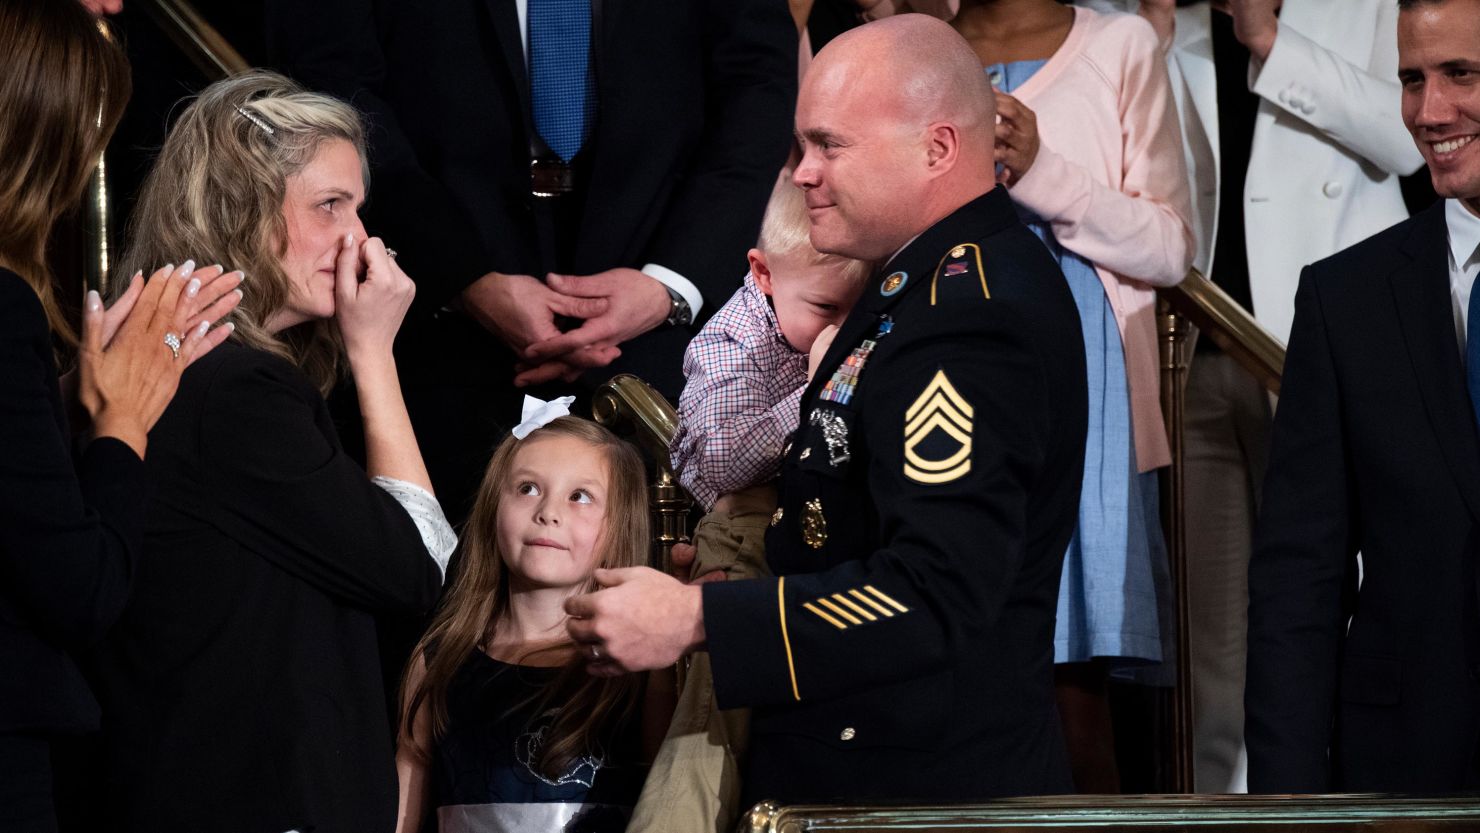 Sgt. 1st Class Townsend Williams greets his wife Amy and their children after a surprise entrance during President Donald Trump's State of the Union address in the House Chamber on Tuesday, February 4, 2020. 